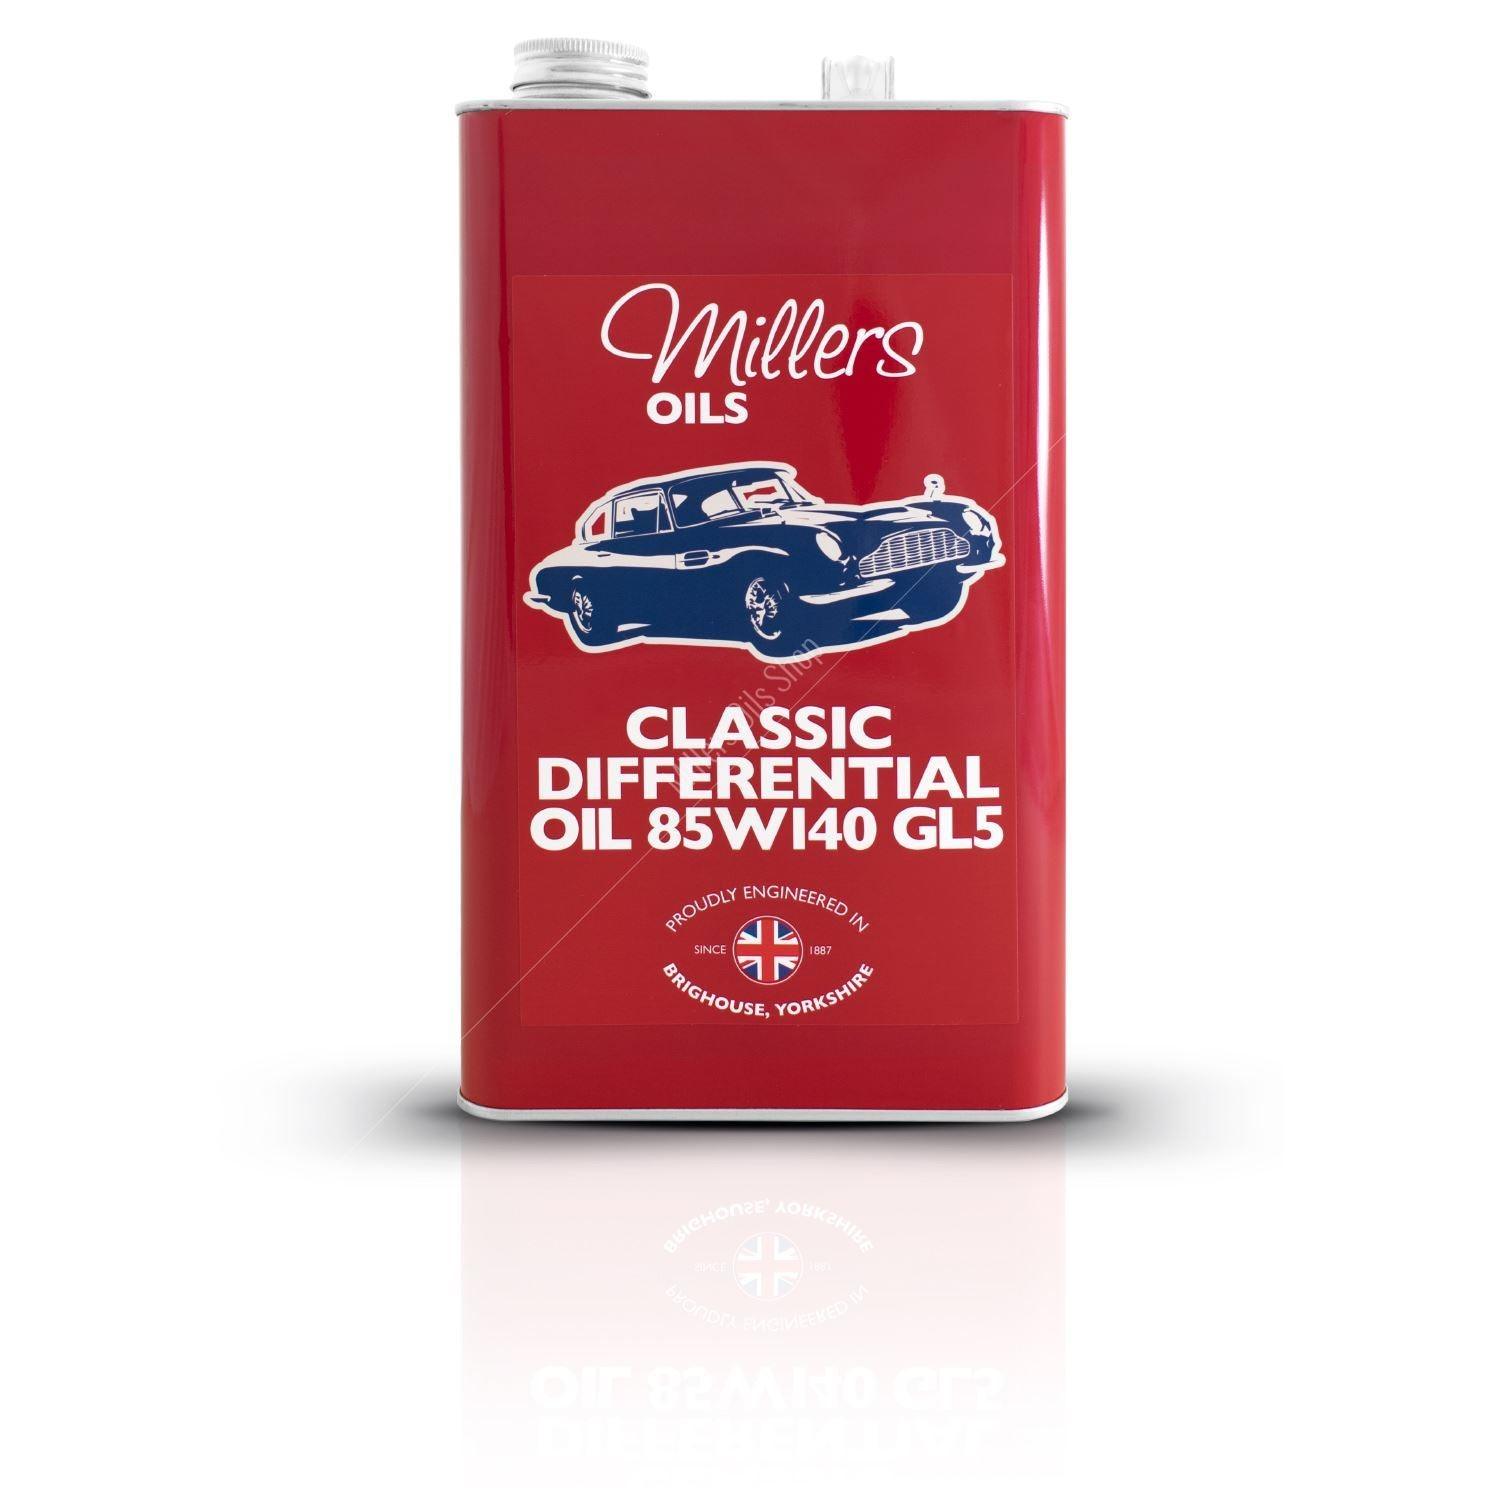 Classic Differential Oil 85w140 GL5 5 liter verpakking - Berry Smink British Car Parts